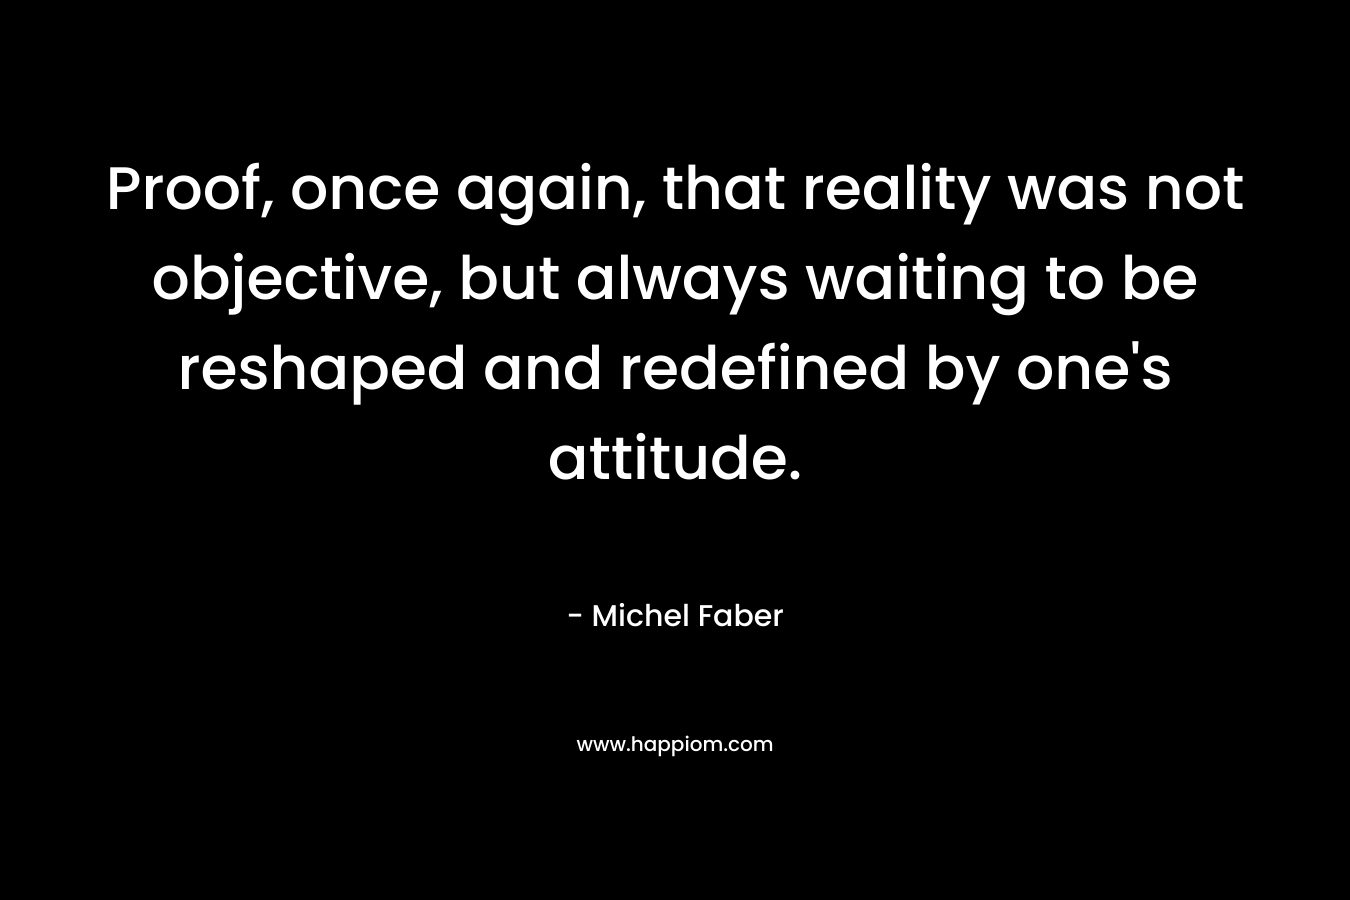 Proof, once again, that reality was not objective, but always waiting to be reshaped and redefined by one’s attitude. – Michel Faber